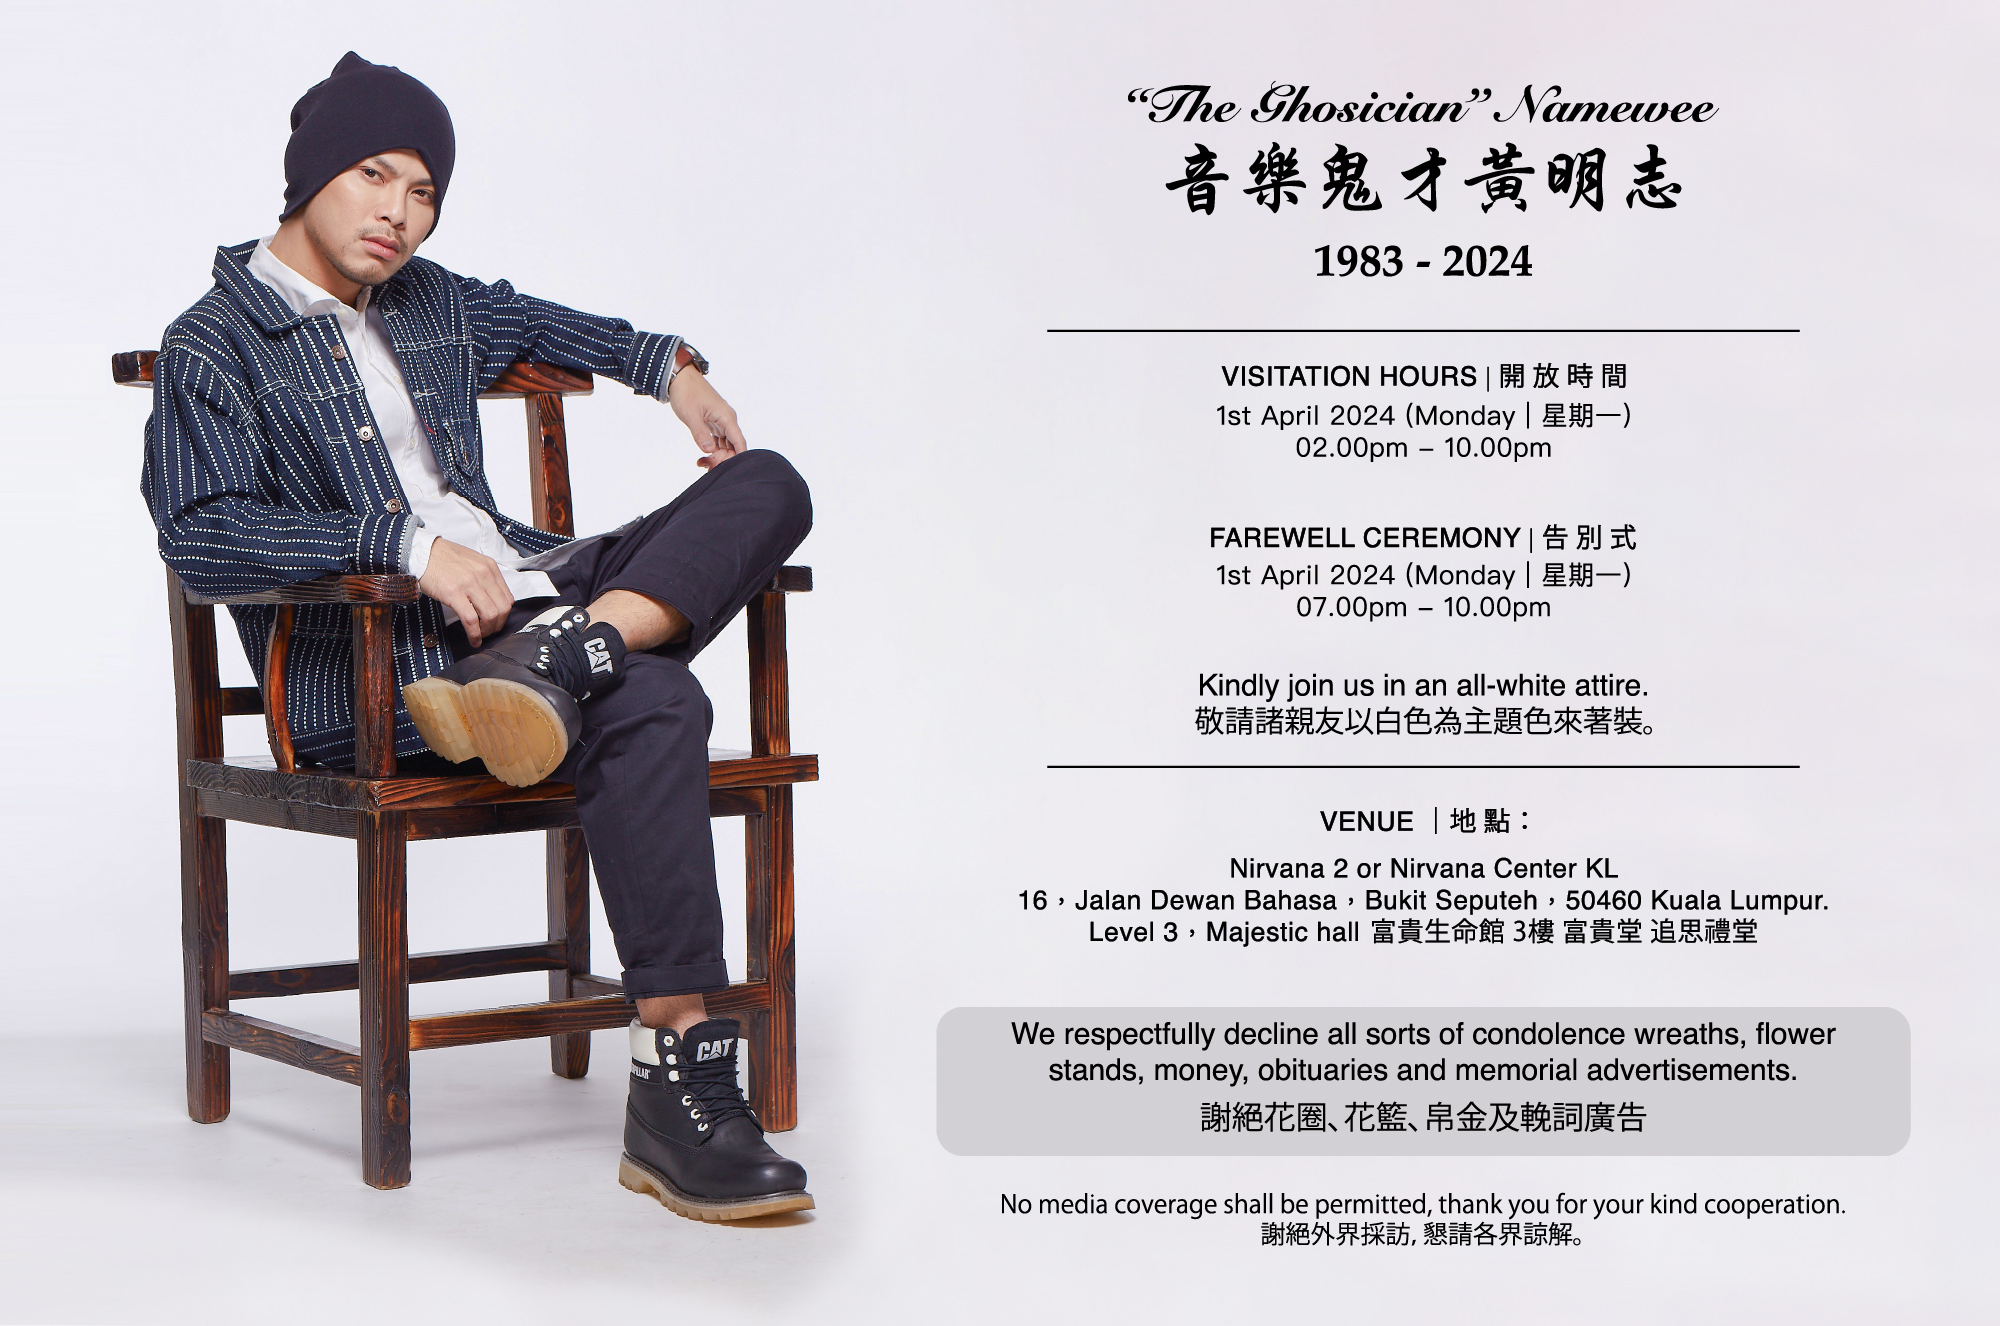 Namewee's funeral details